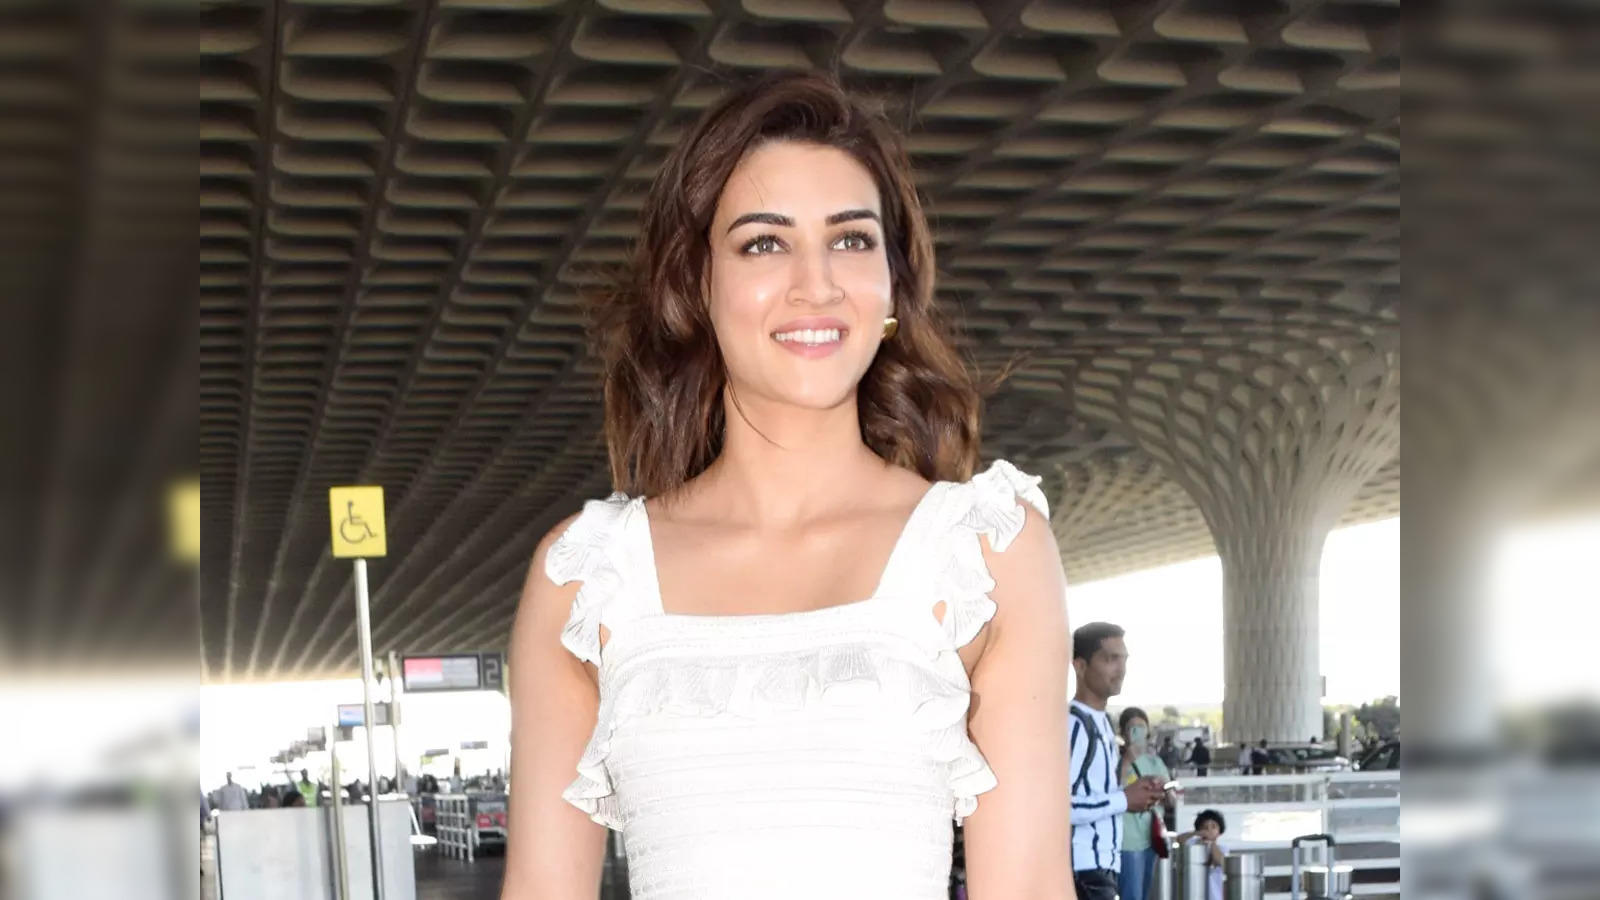 kriti sanon news: Kriti Sanon wins hearts after videos of her flying  economy go viral - The Economic Times